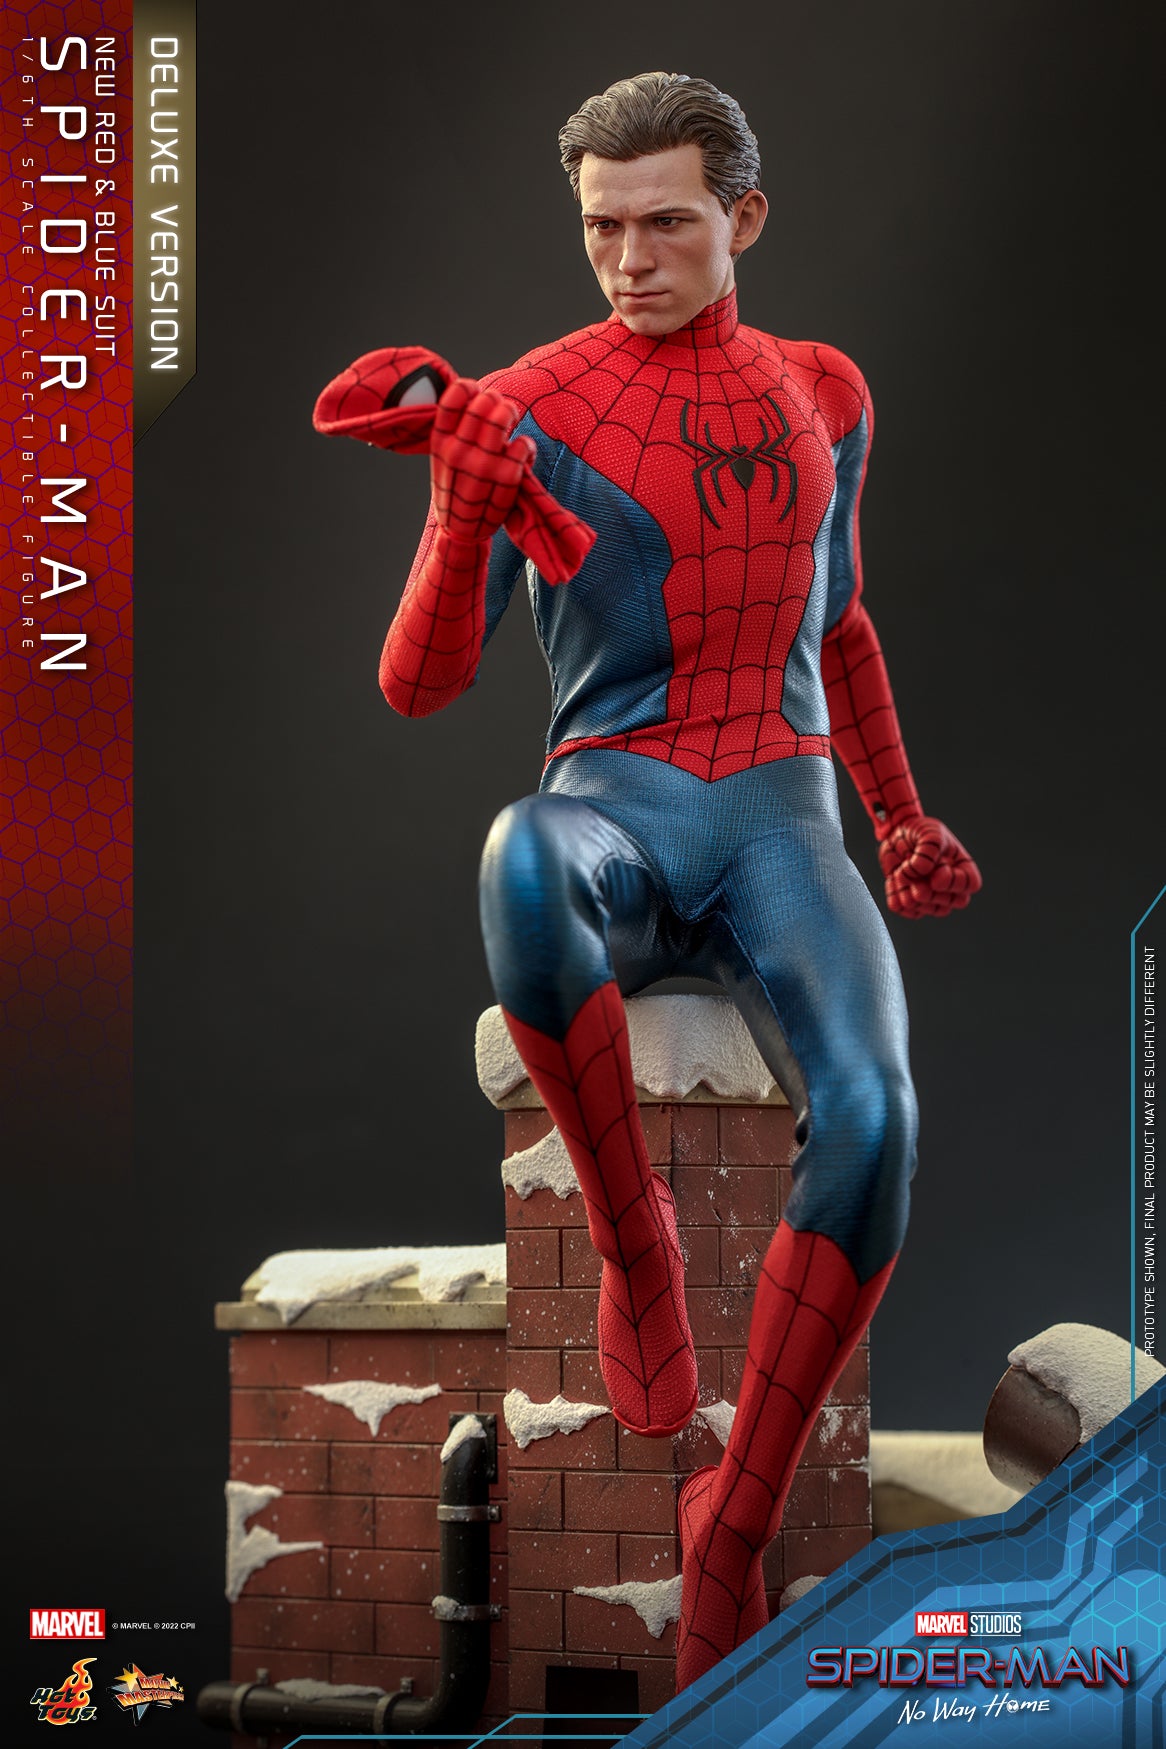 Hot Toys - MMS680 - Spider-Man: No Way Home - Spider-Man (New Red and Blue Suit) (Deluxe) - Marvelous Toys